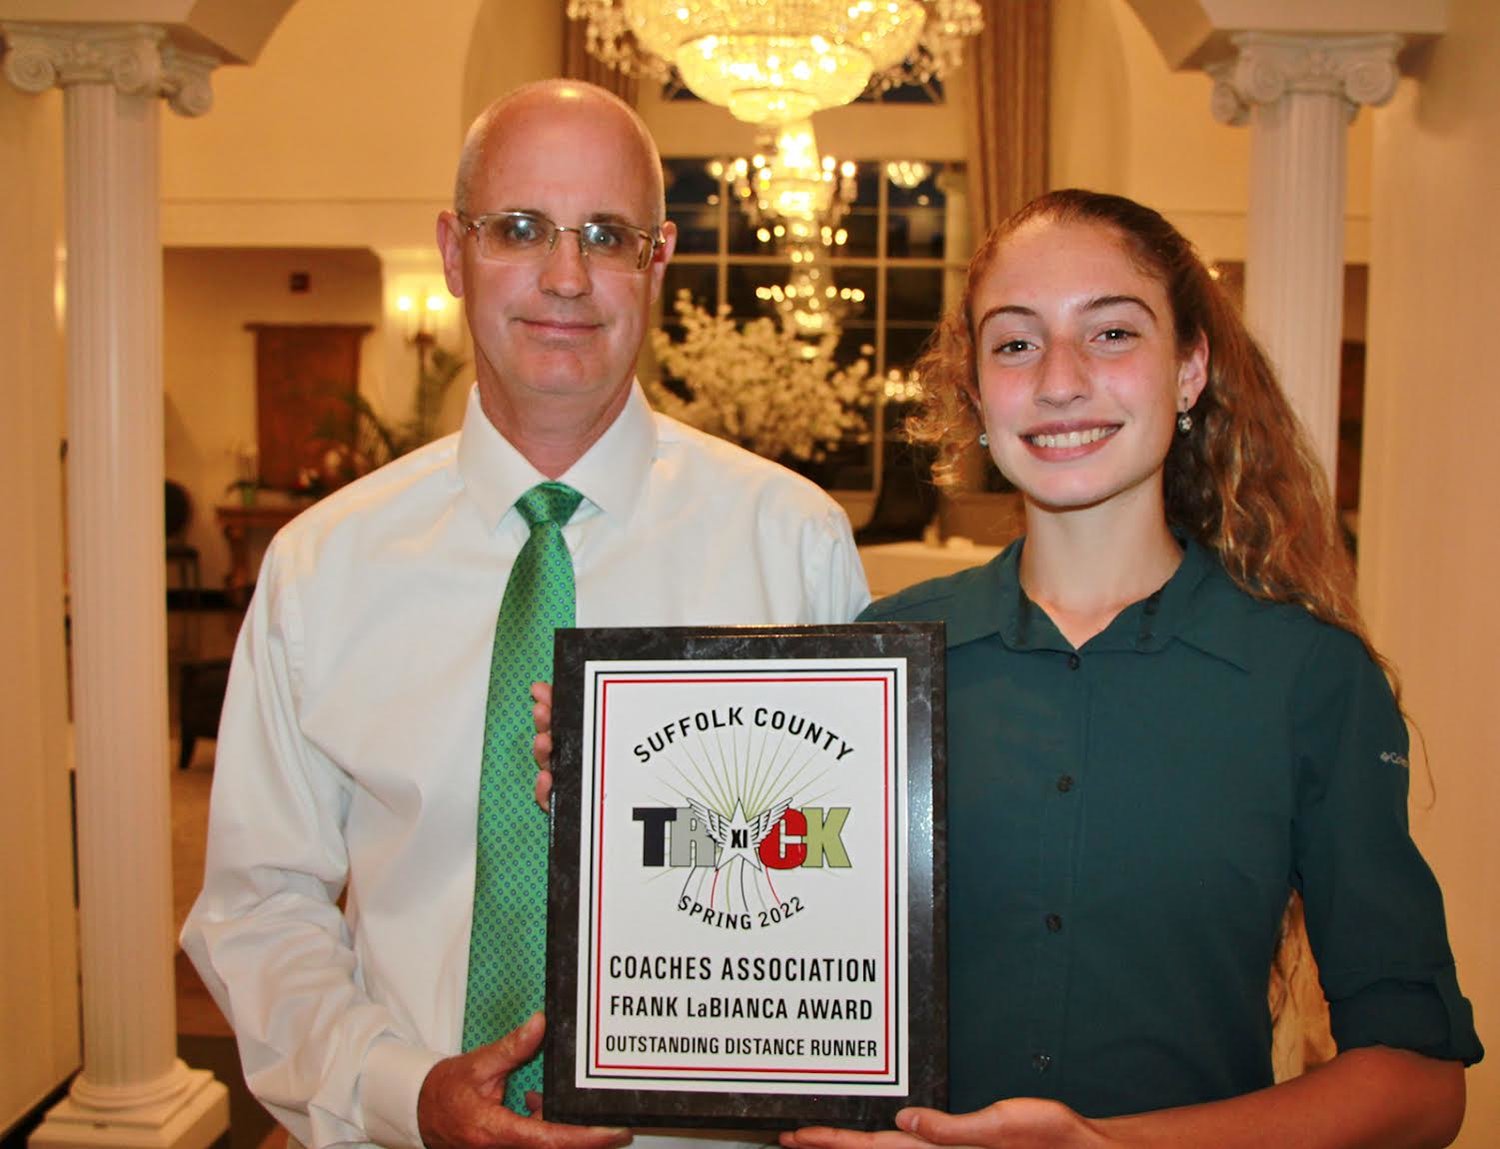 William Floyd High School freshman Zariel Macchia is pictured with head coach John Ryan receiving her second consecutive Coach Frank LaBianca Award as the most outstanding distance runner in Suffolk County.